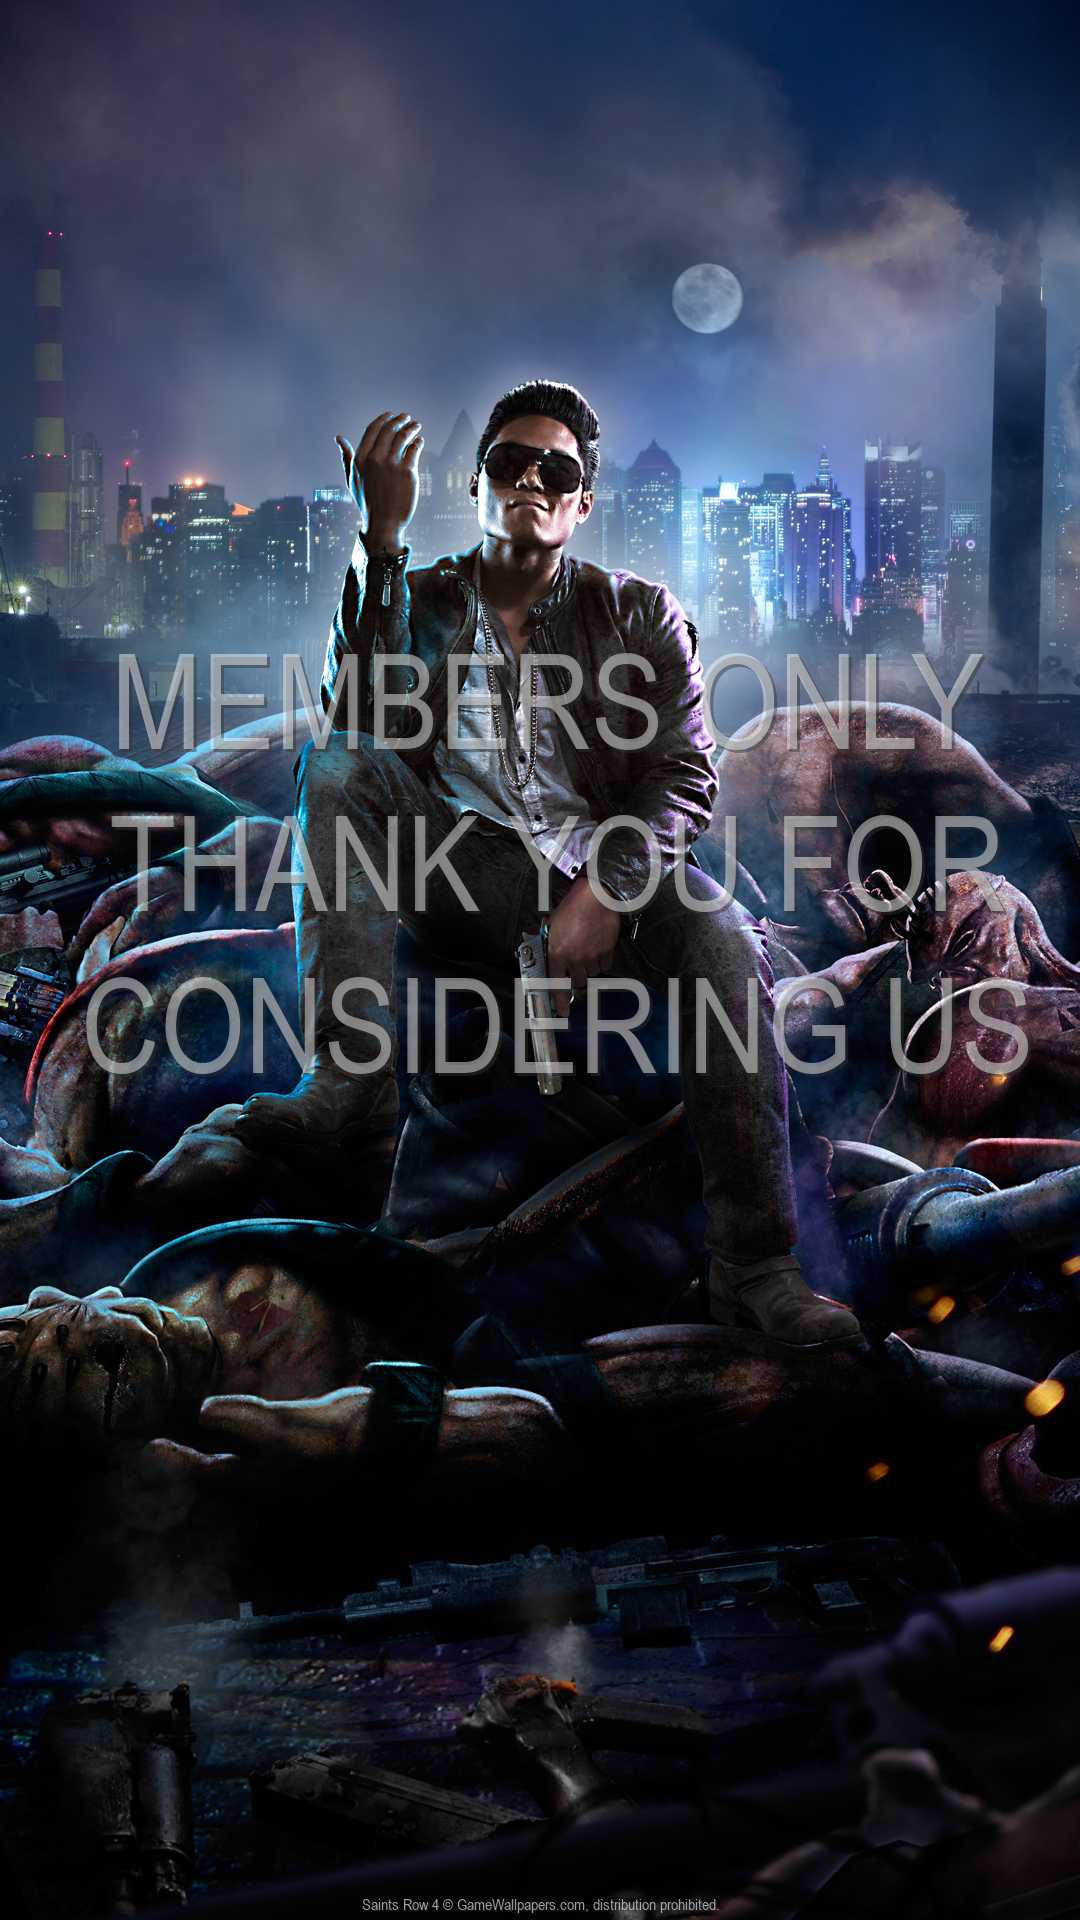 Saints Row 4 1080p%20Vertical Mobile wallpaper or background 03